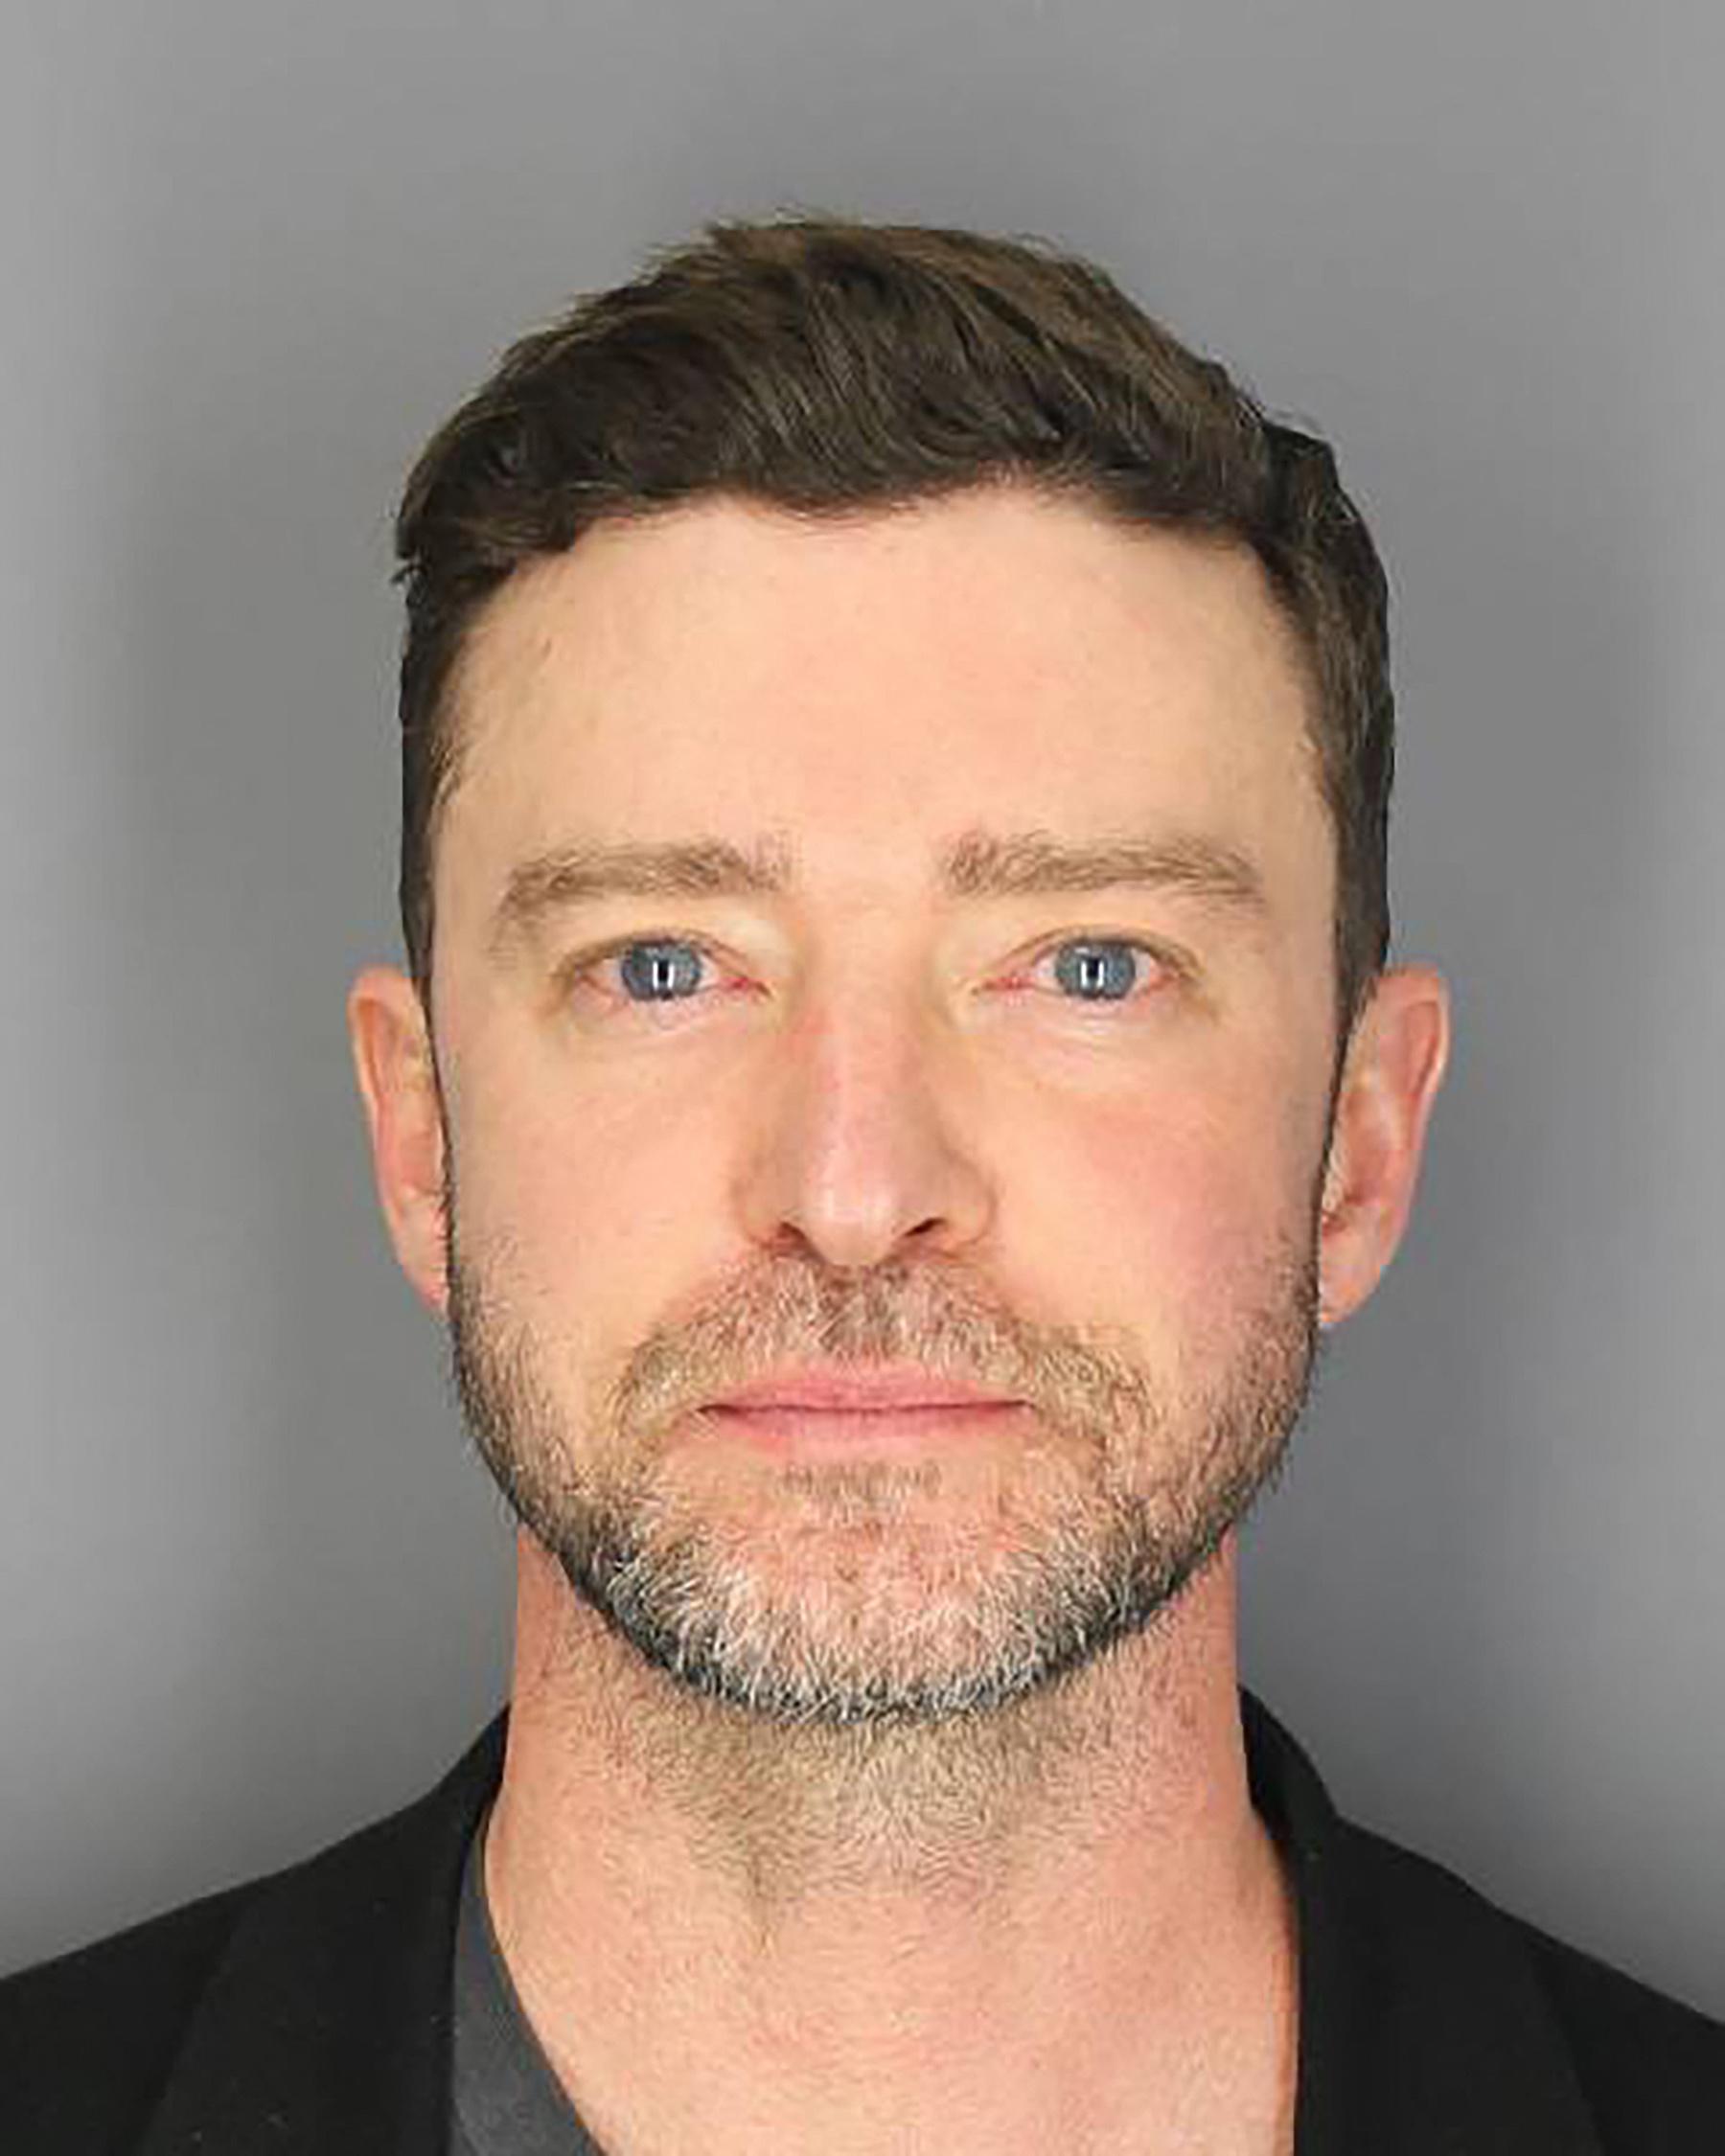 Justin Timberlake is glassy eyed on his mugshot after being arrested for driving while intoxicated (DWI) in Sag Harbor, NY.